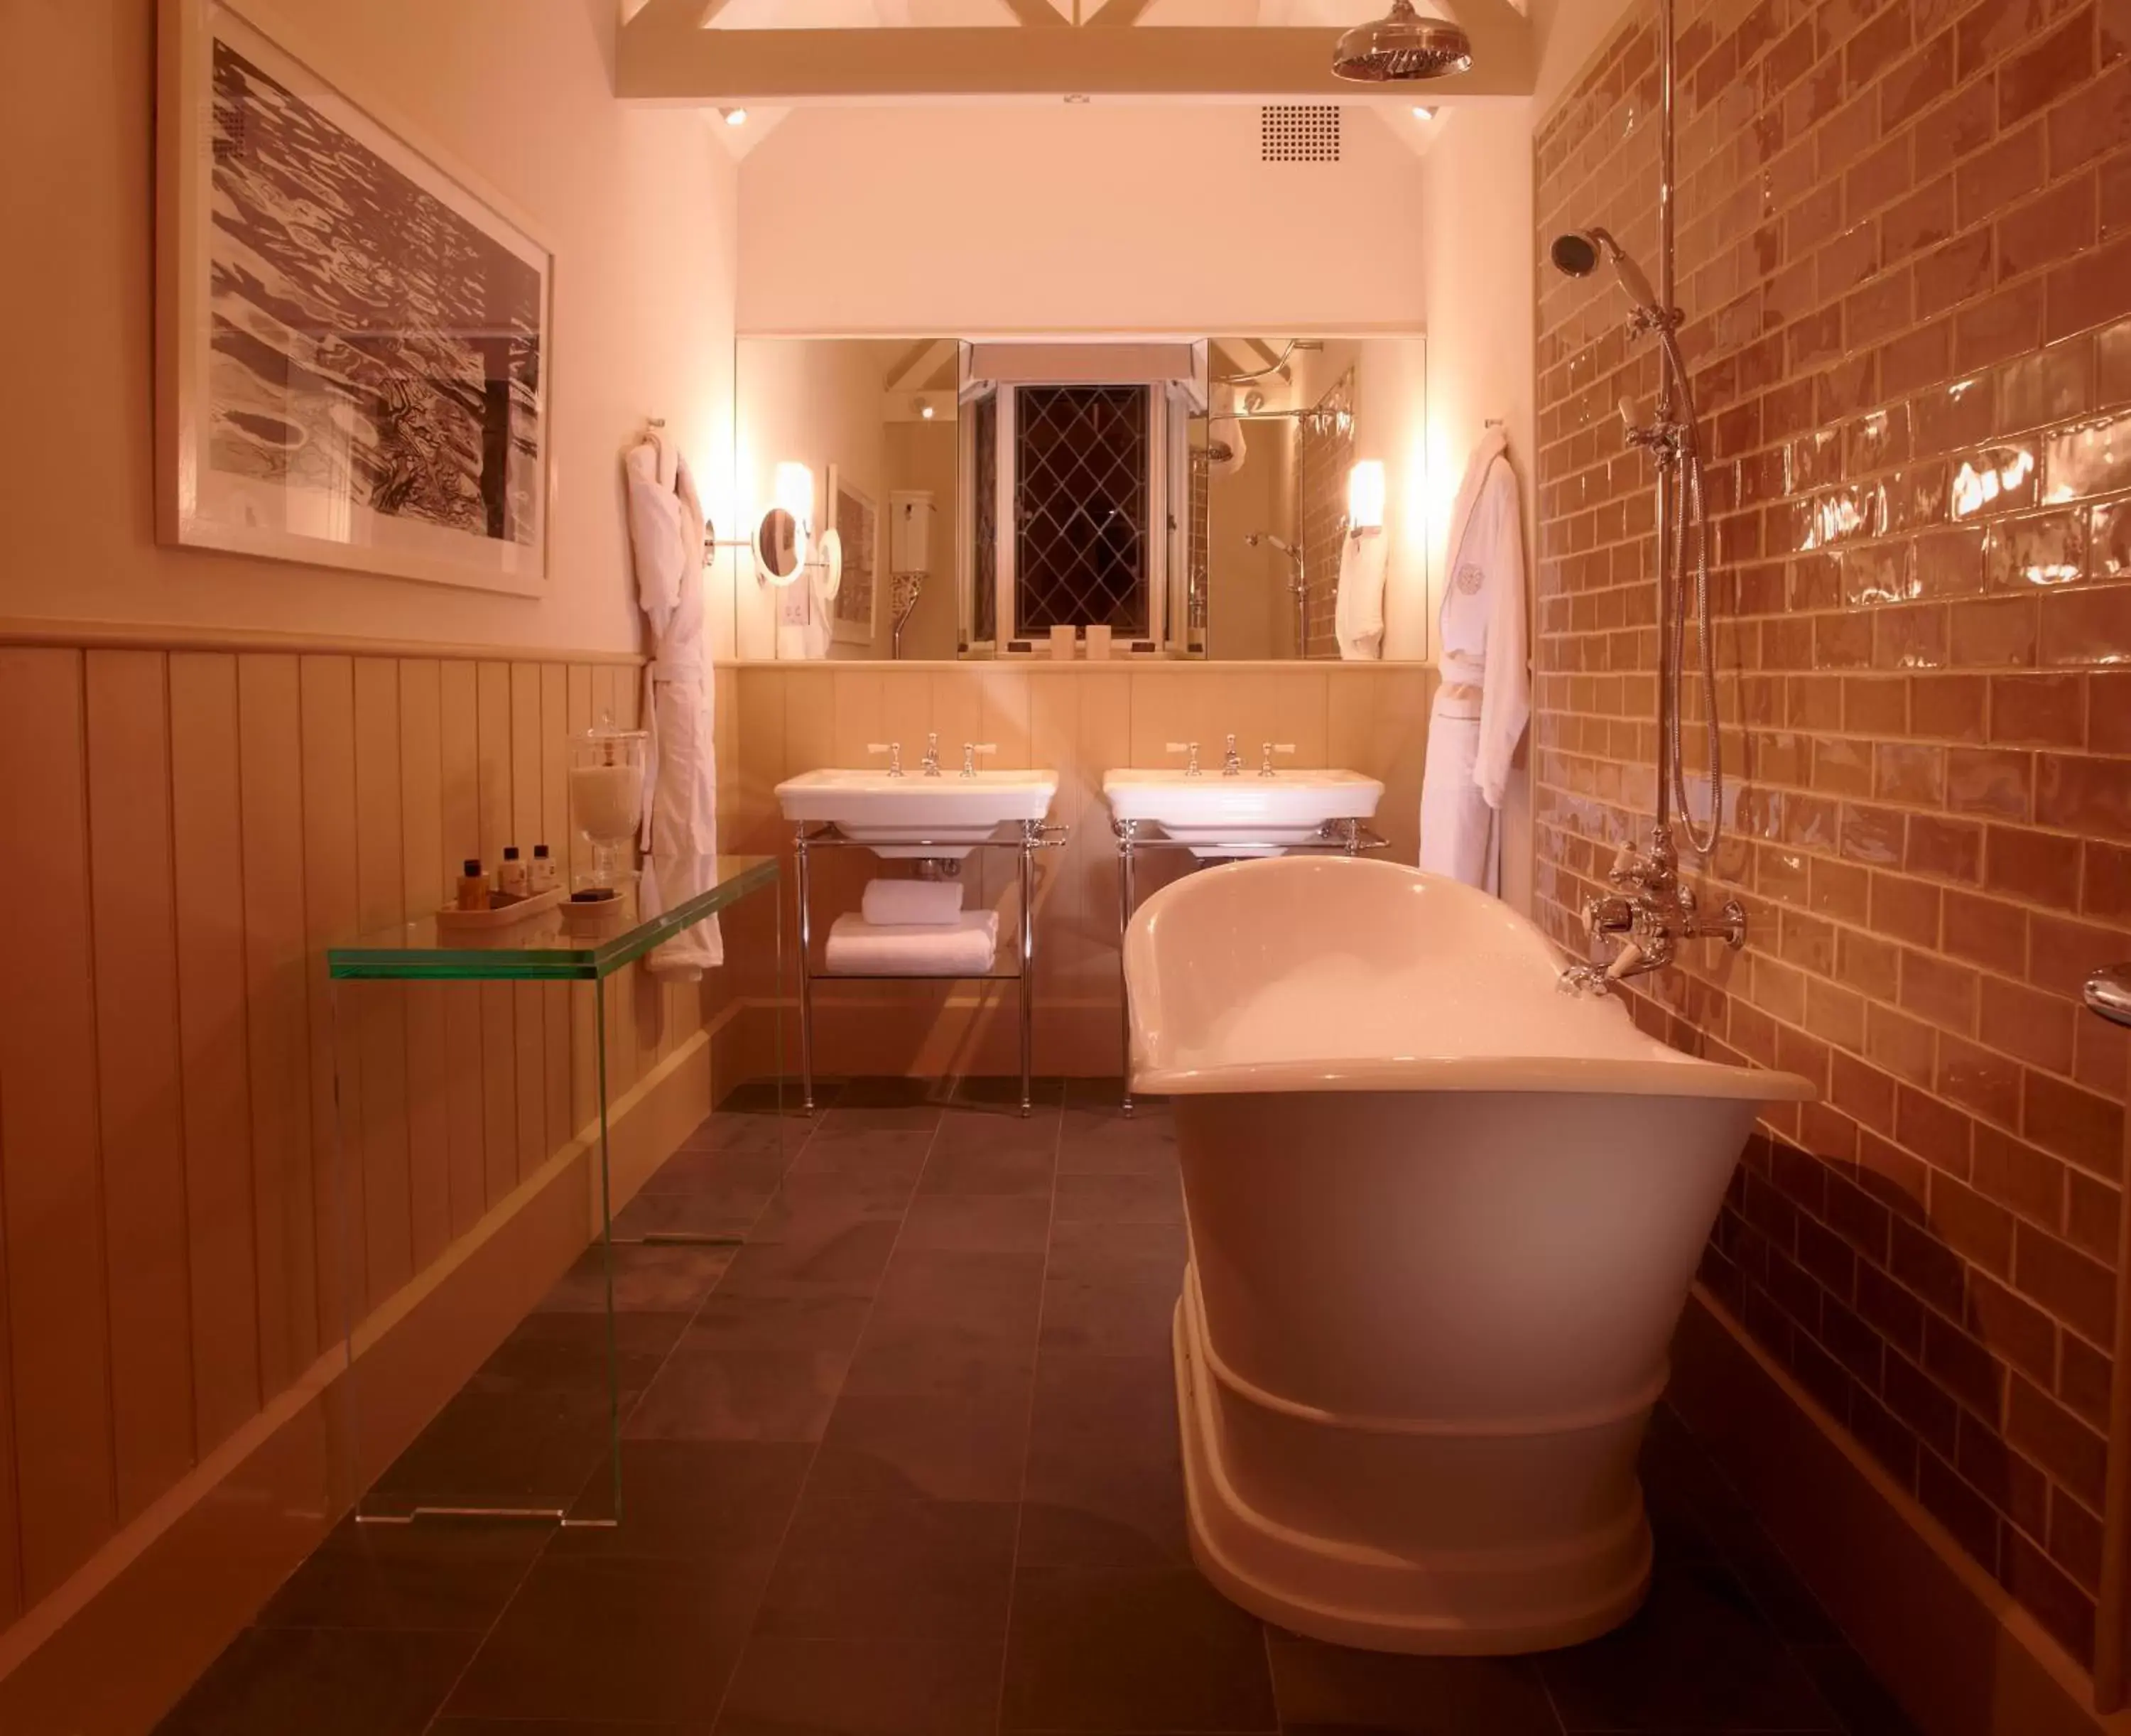 Bathroom in Cliveden House - an Iconic Luxury Hotel